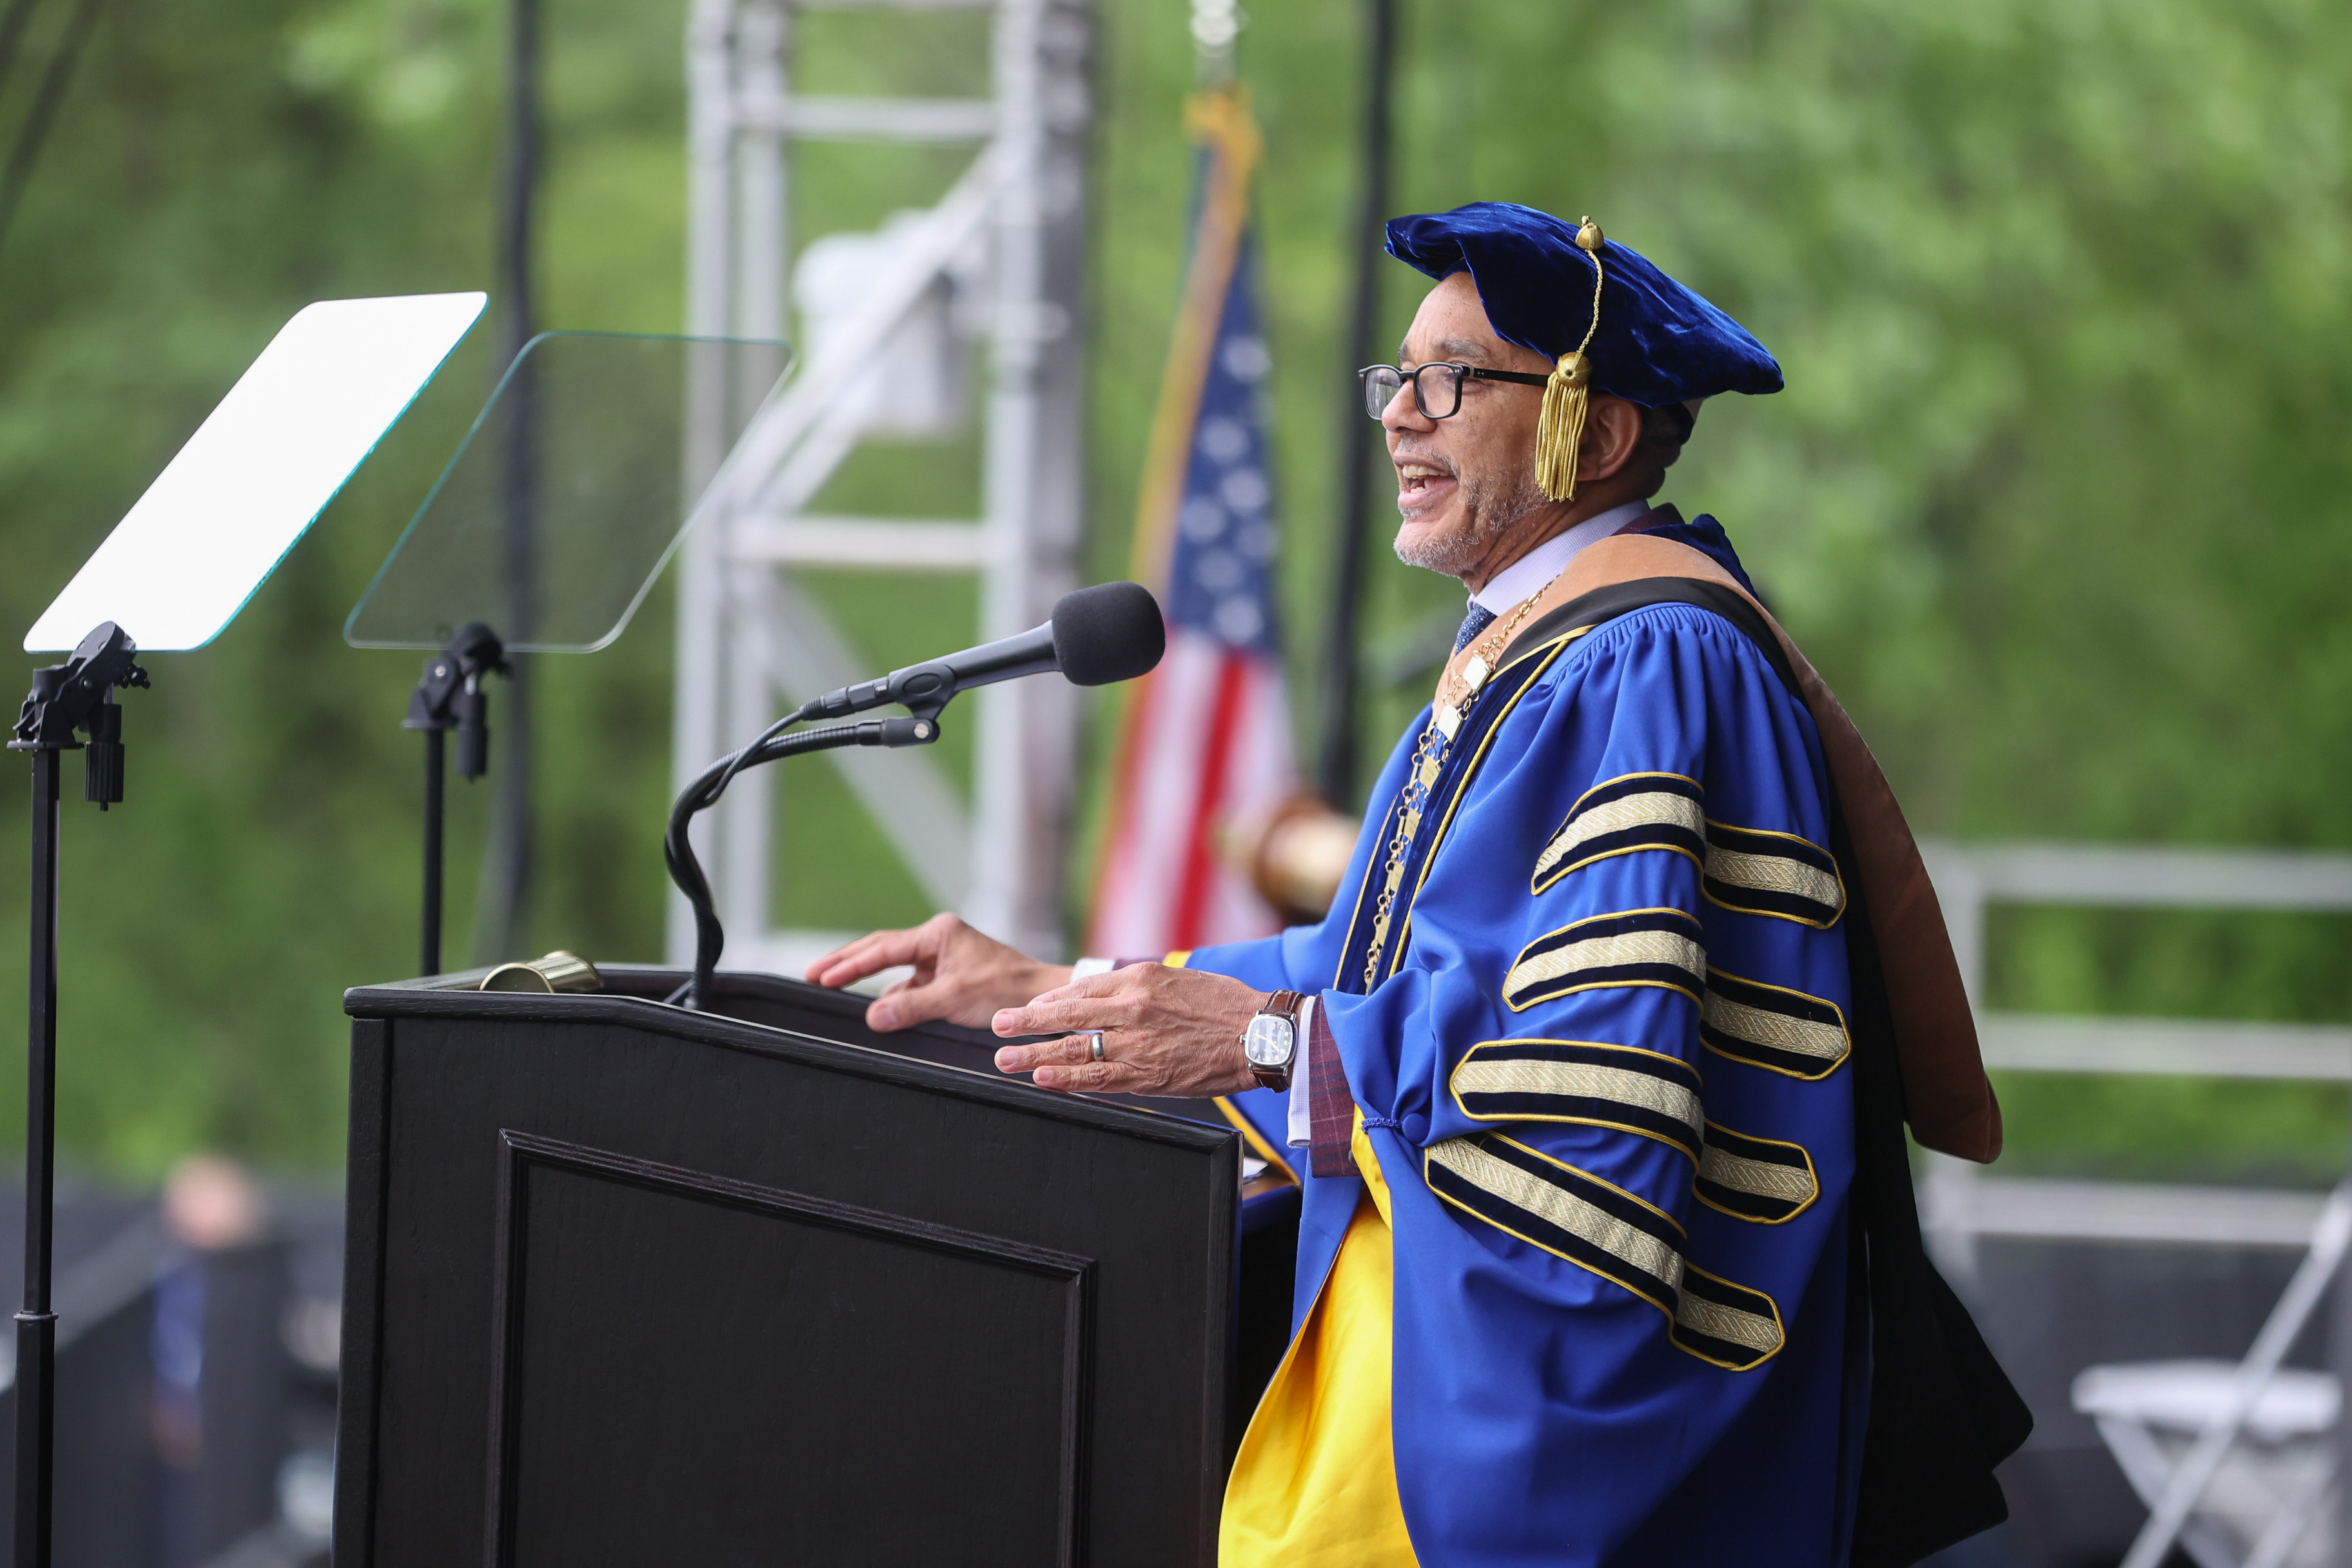 President Chrite delivers the commencement address from behind the podium